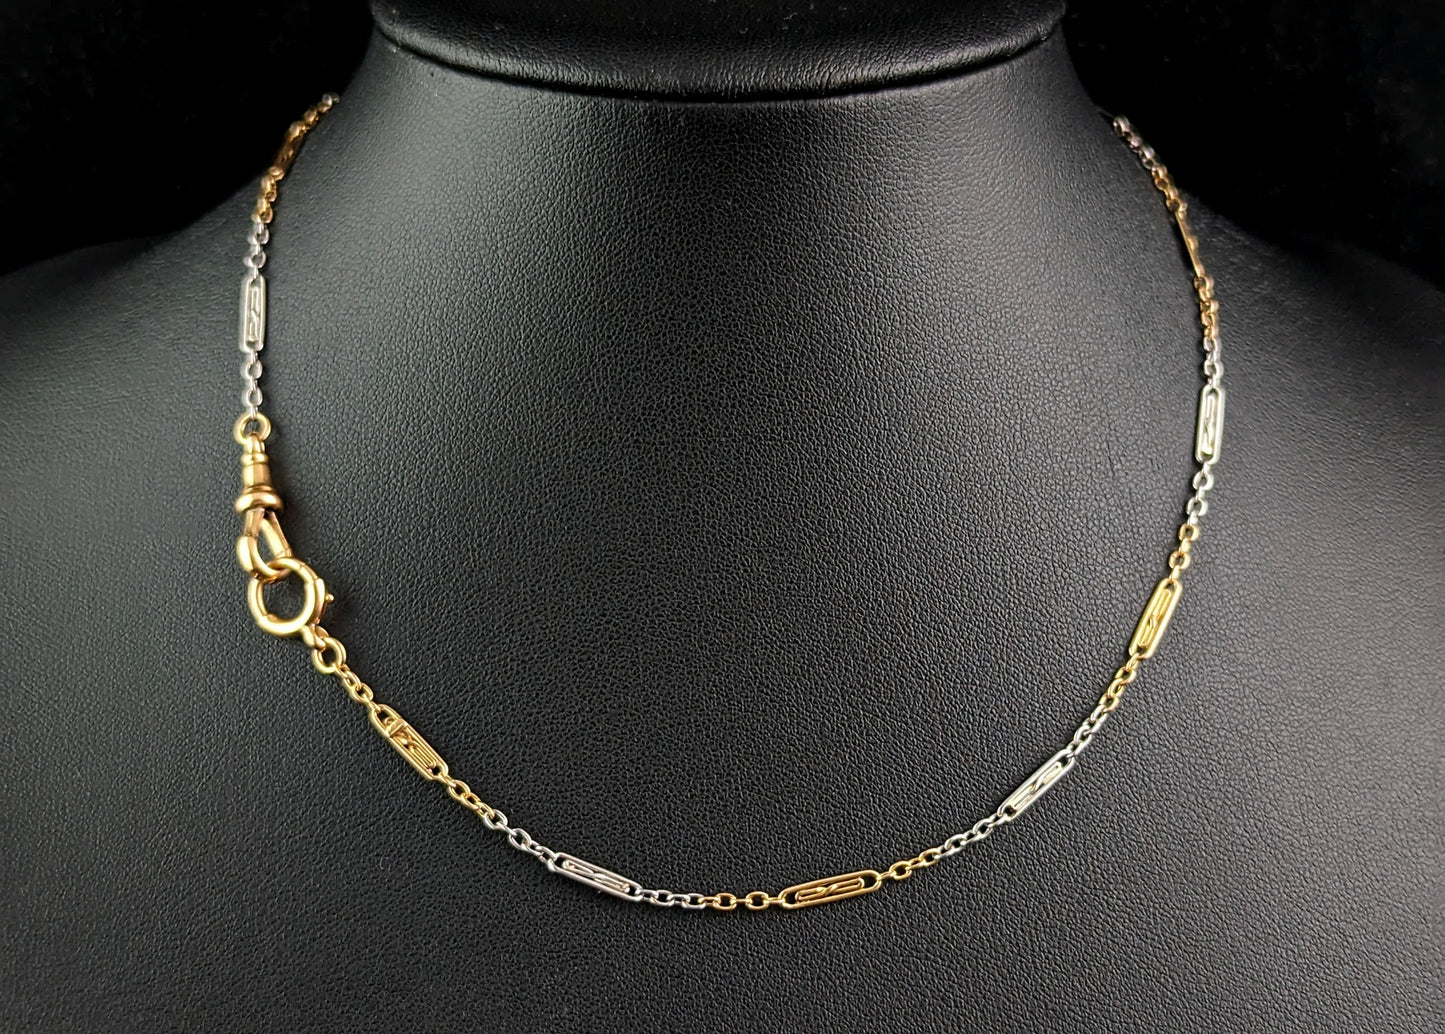 Antique 18ct gold and platinum Albert chain, watch chain, necklace